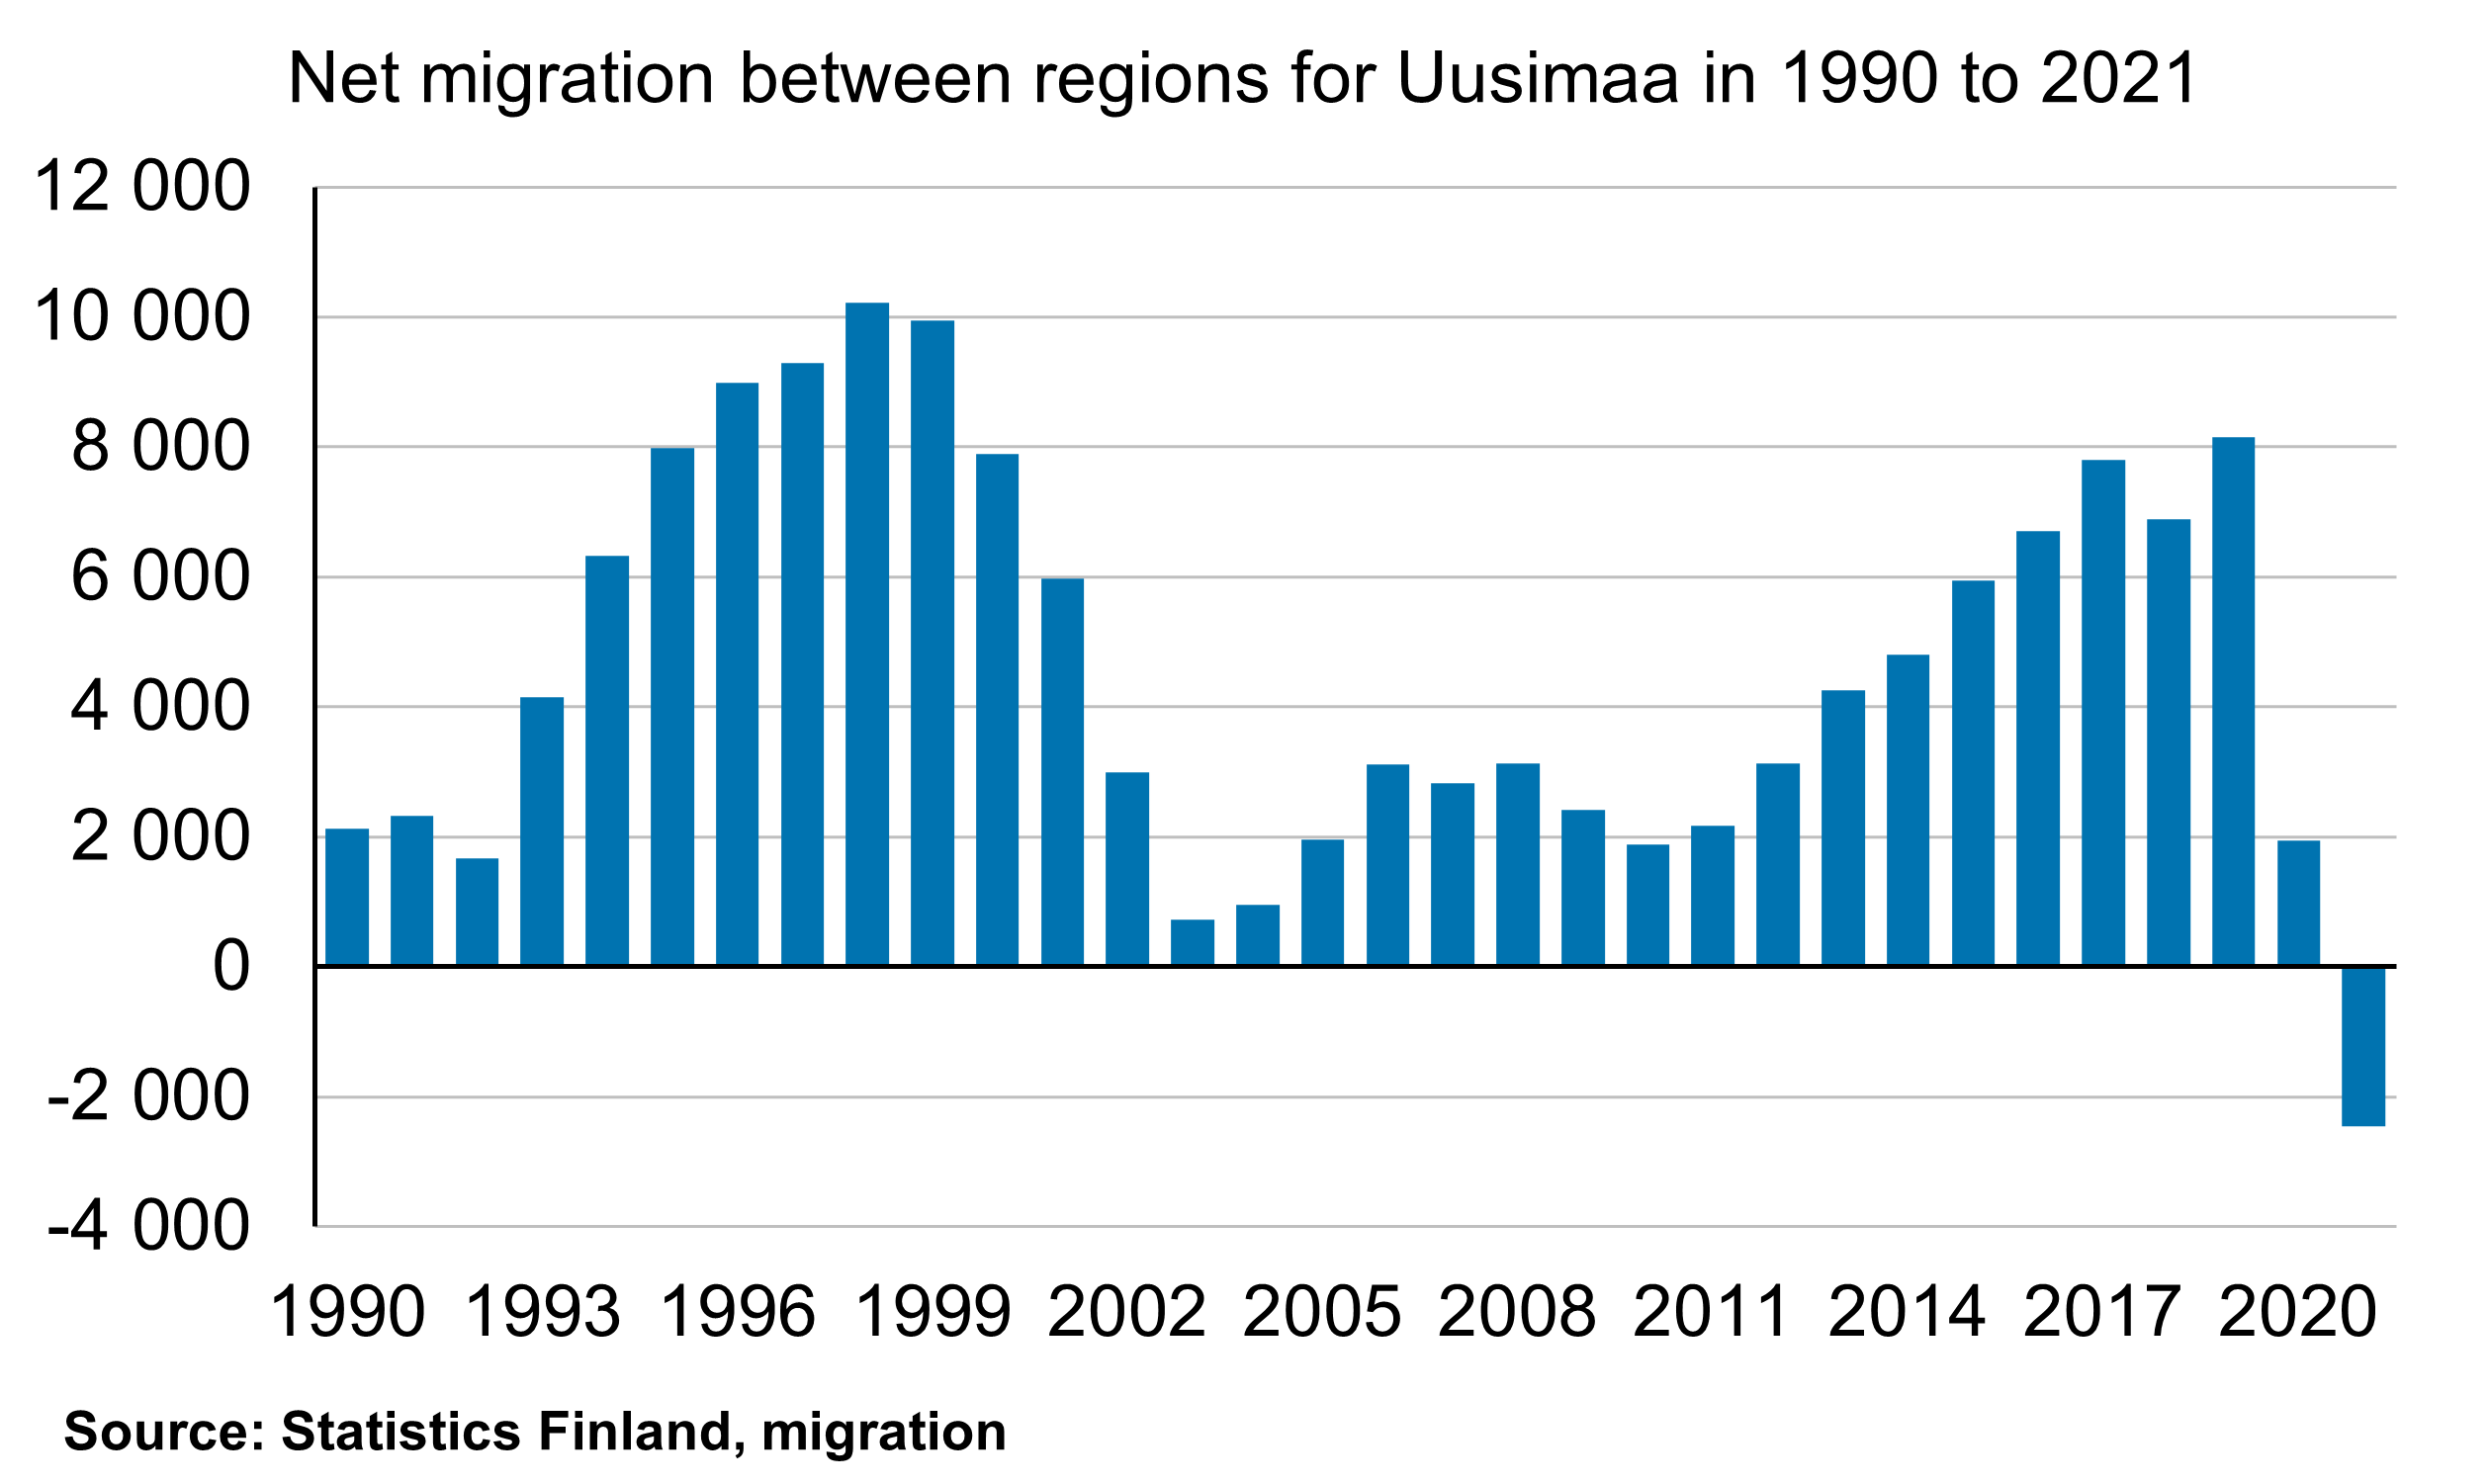 The bar chart describes net migration between Uusimaa and the rest of Finland. In the 1990s, net migration for Uusimaa rose from about 2,000 to around 10,000 persons. In the 2000s, net migration for Uusimaa declined to under one thousand people, after which it rose to 8,000 towards the end of the 2010s. In 2021, net migration for Uusimaa fell to the lowest level in the reference period, being good 2,000 persons negative.